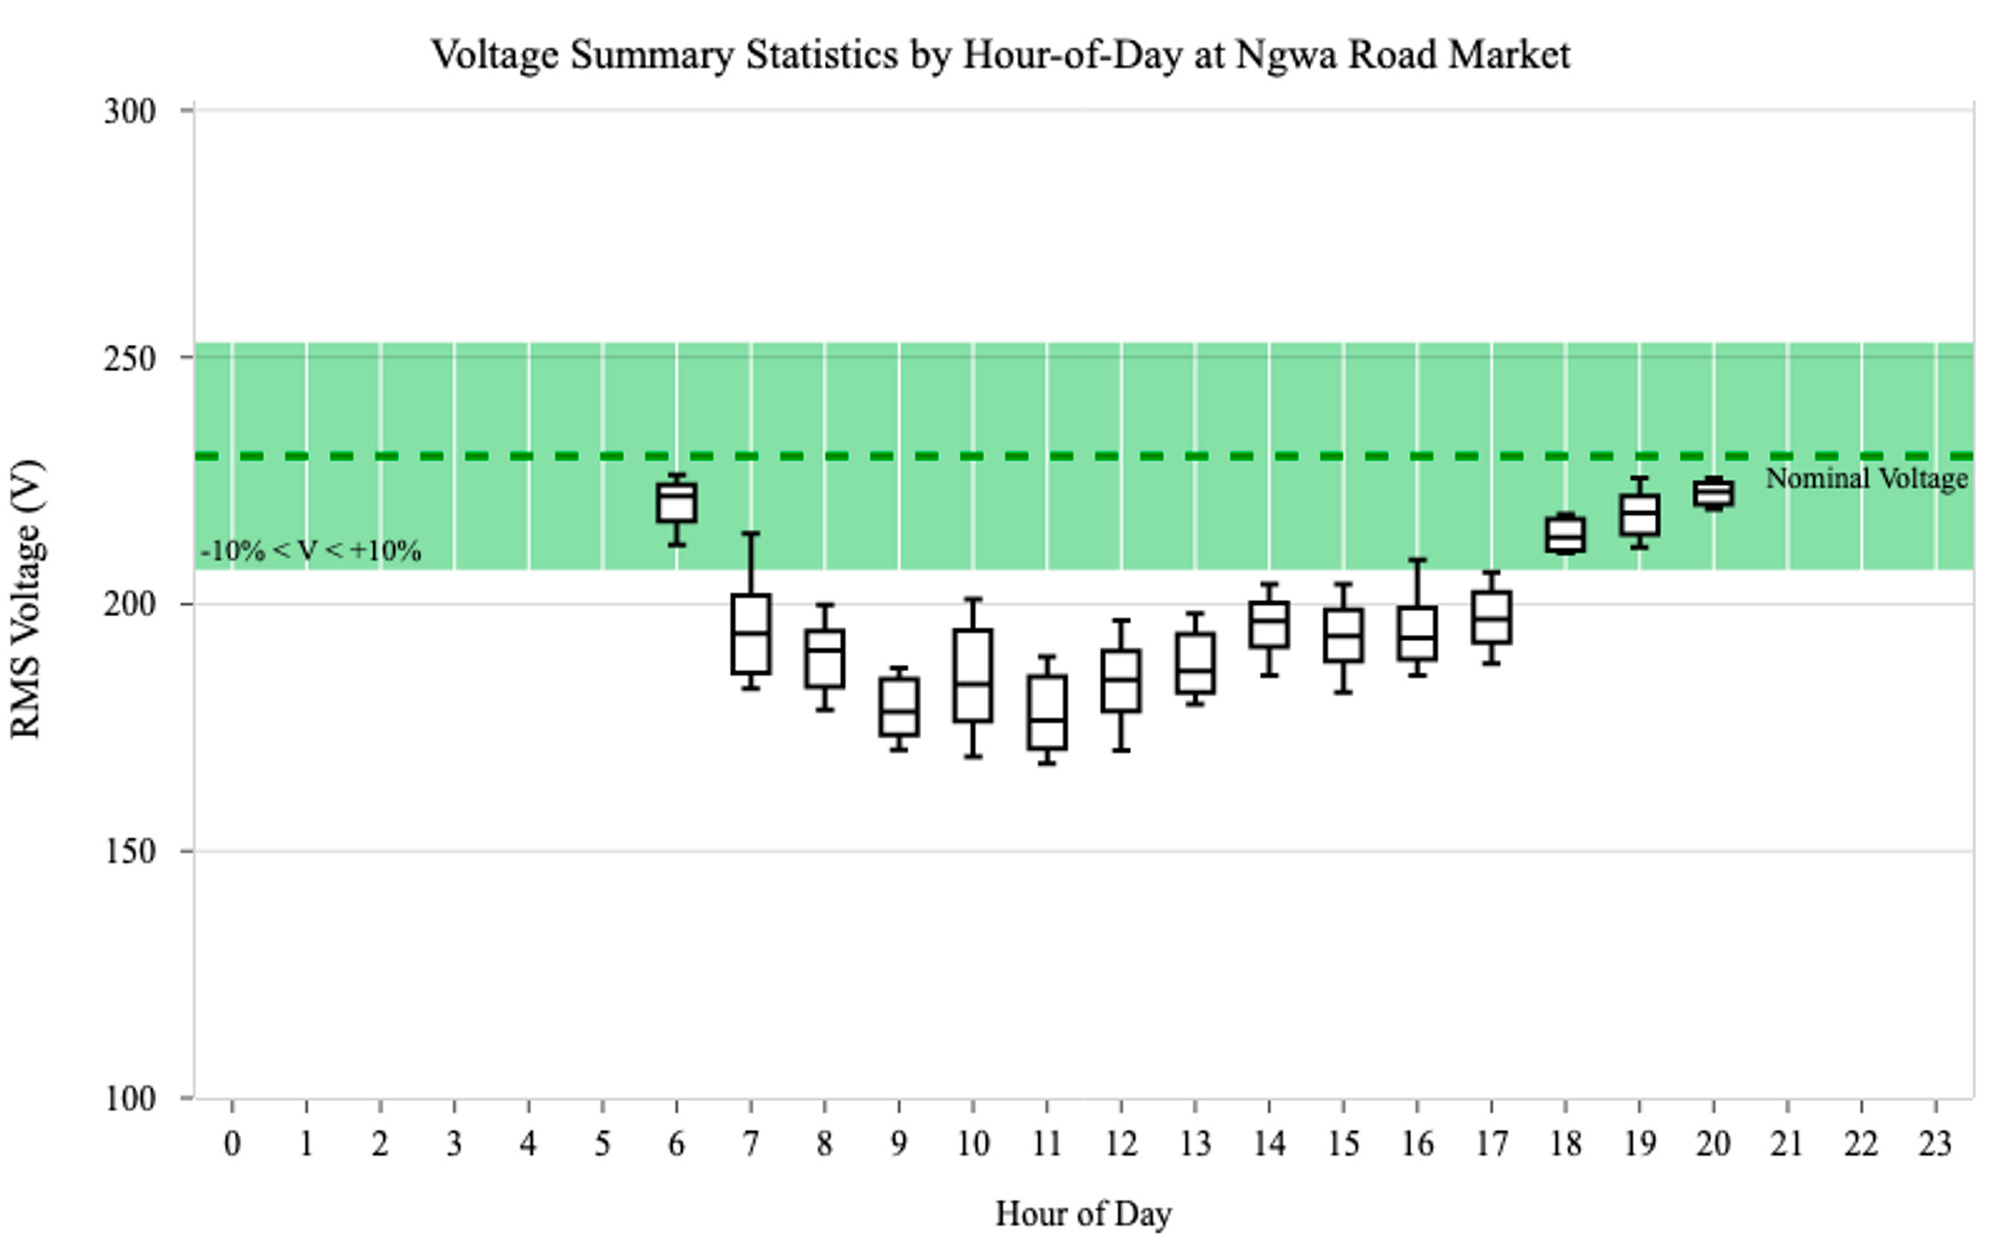 Figure 10: Voltage distribution by hour-of-day at Ngwa Road Market. The green rectangle represents the recommended voltage tolerance window of ±10% of the nominal voltage of 230V. Voltage readings are persistently low during business hours. Throughout the entire deployment period, there was just one night(April 01, 2022, breaking April 02, 2022) when one sensor reported voltage values between 150 and 200V. The other sensors reported outages (0V) during non-business hours. Data from one sensor for a single night is insufficient to give insight into the voltage quality at night in this market. 